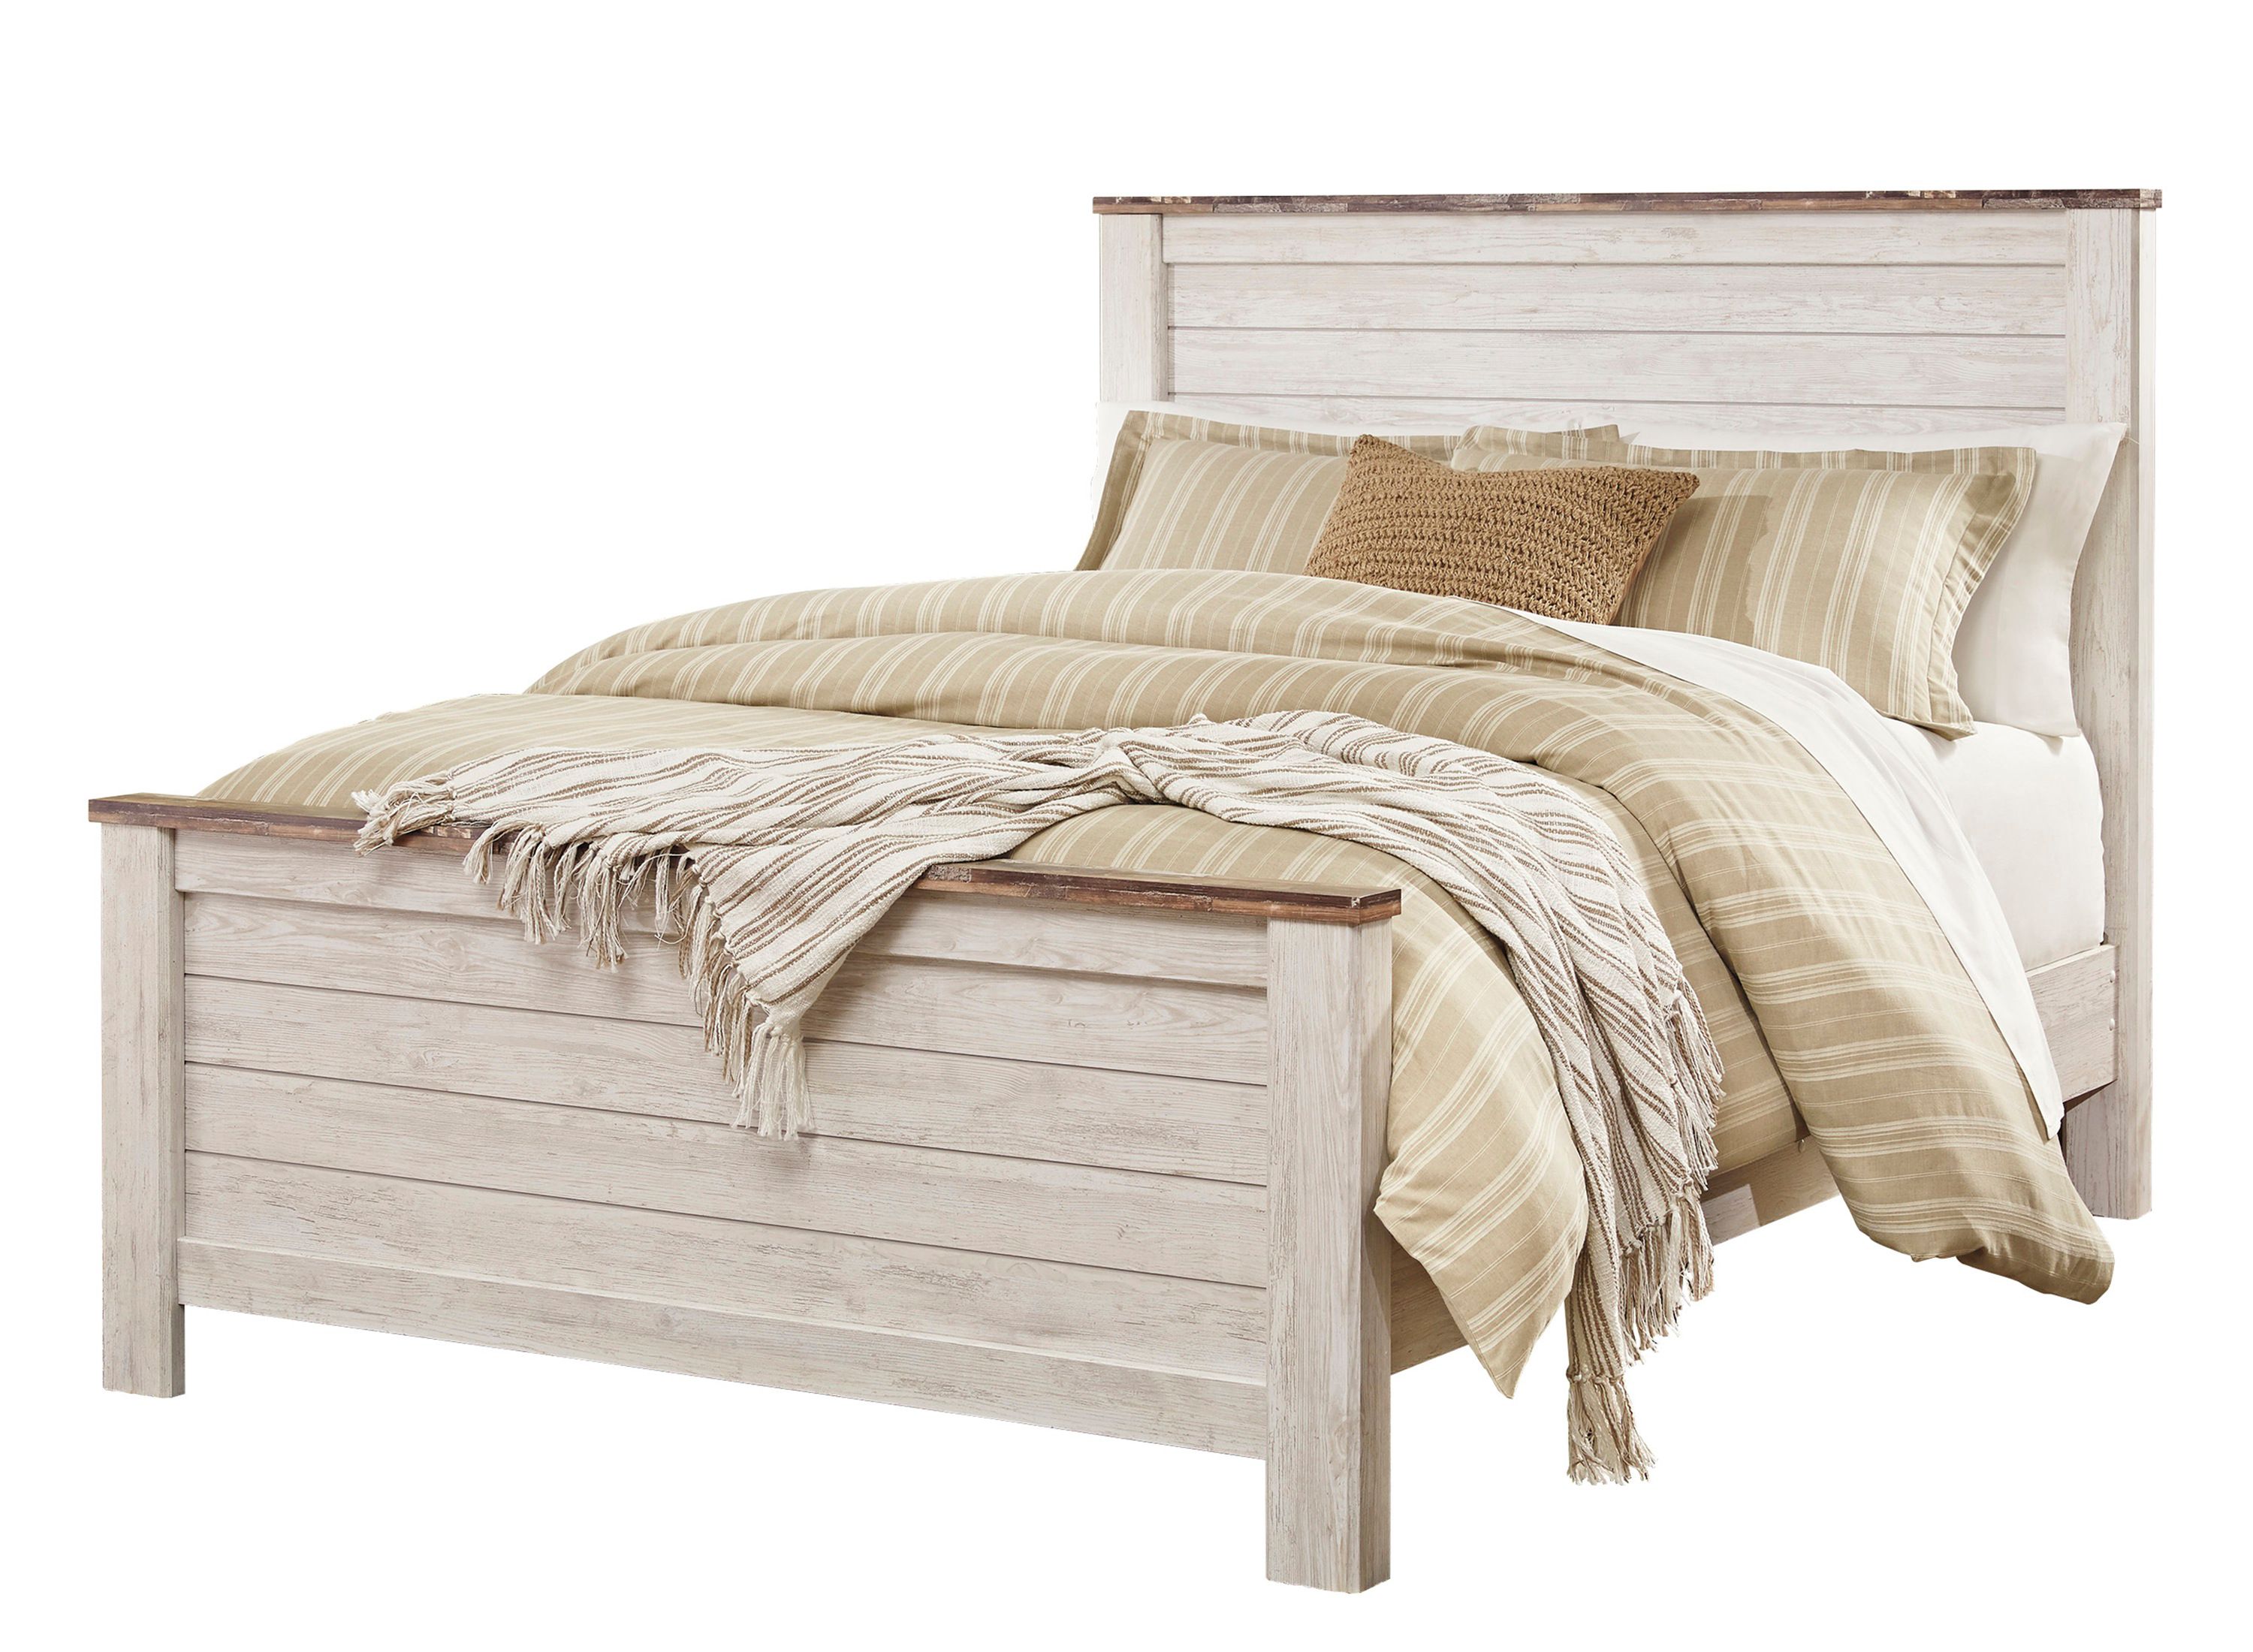 Collingwood Bed Raymour Flanigan, Raymour And Flanigan King Bed Frame